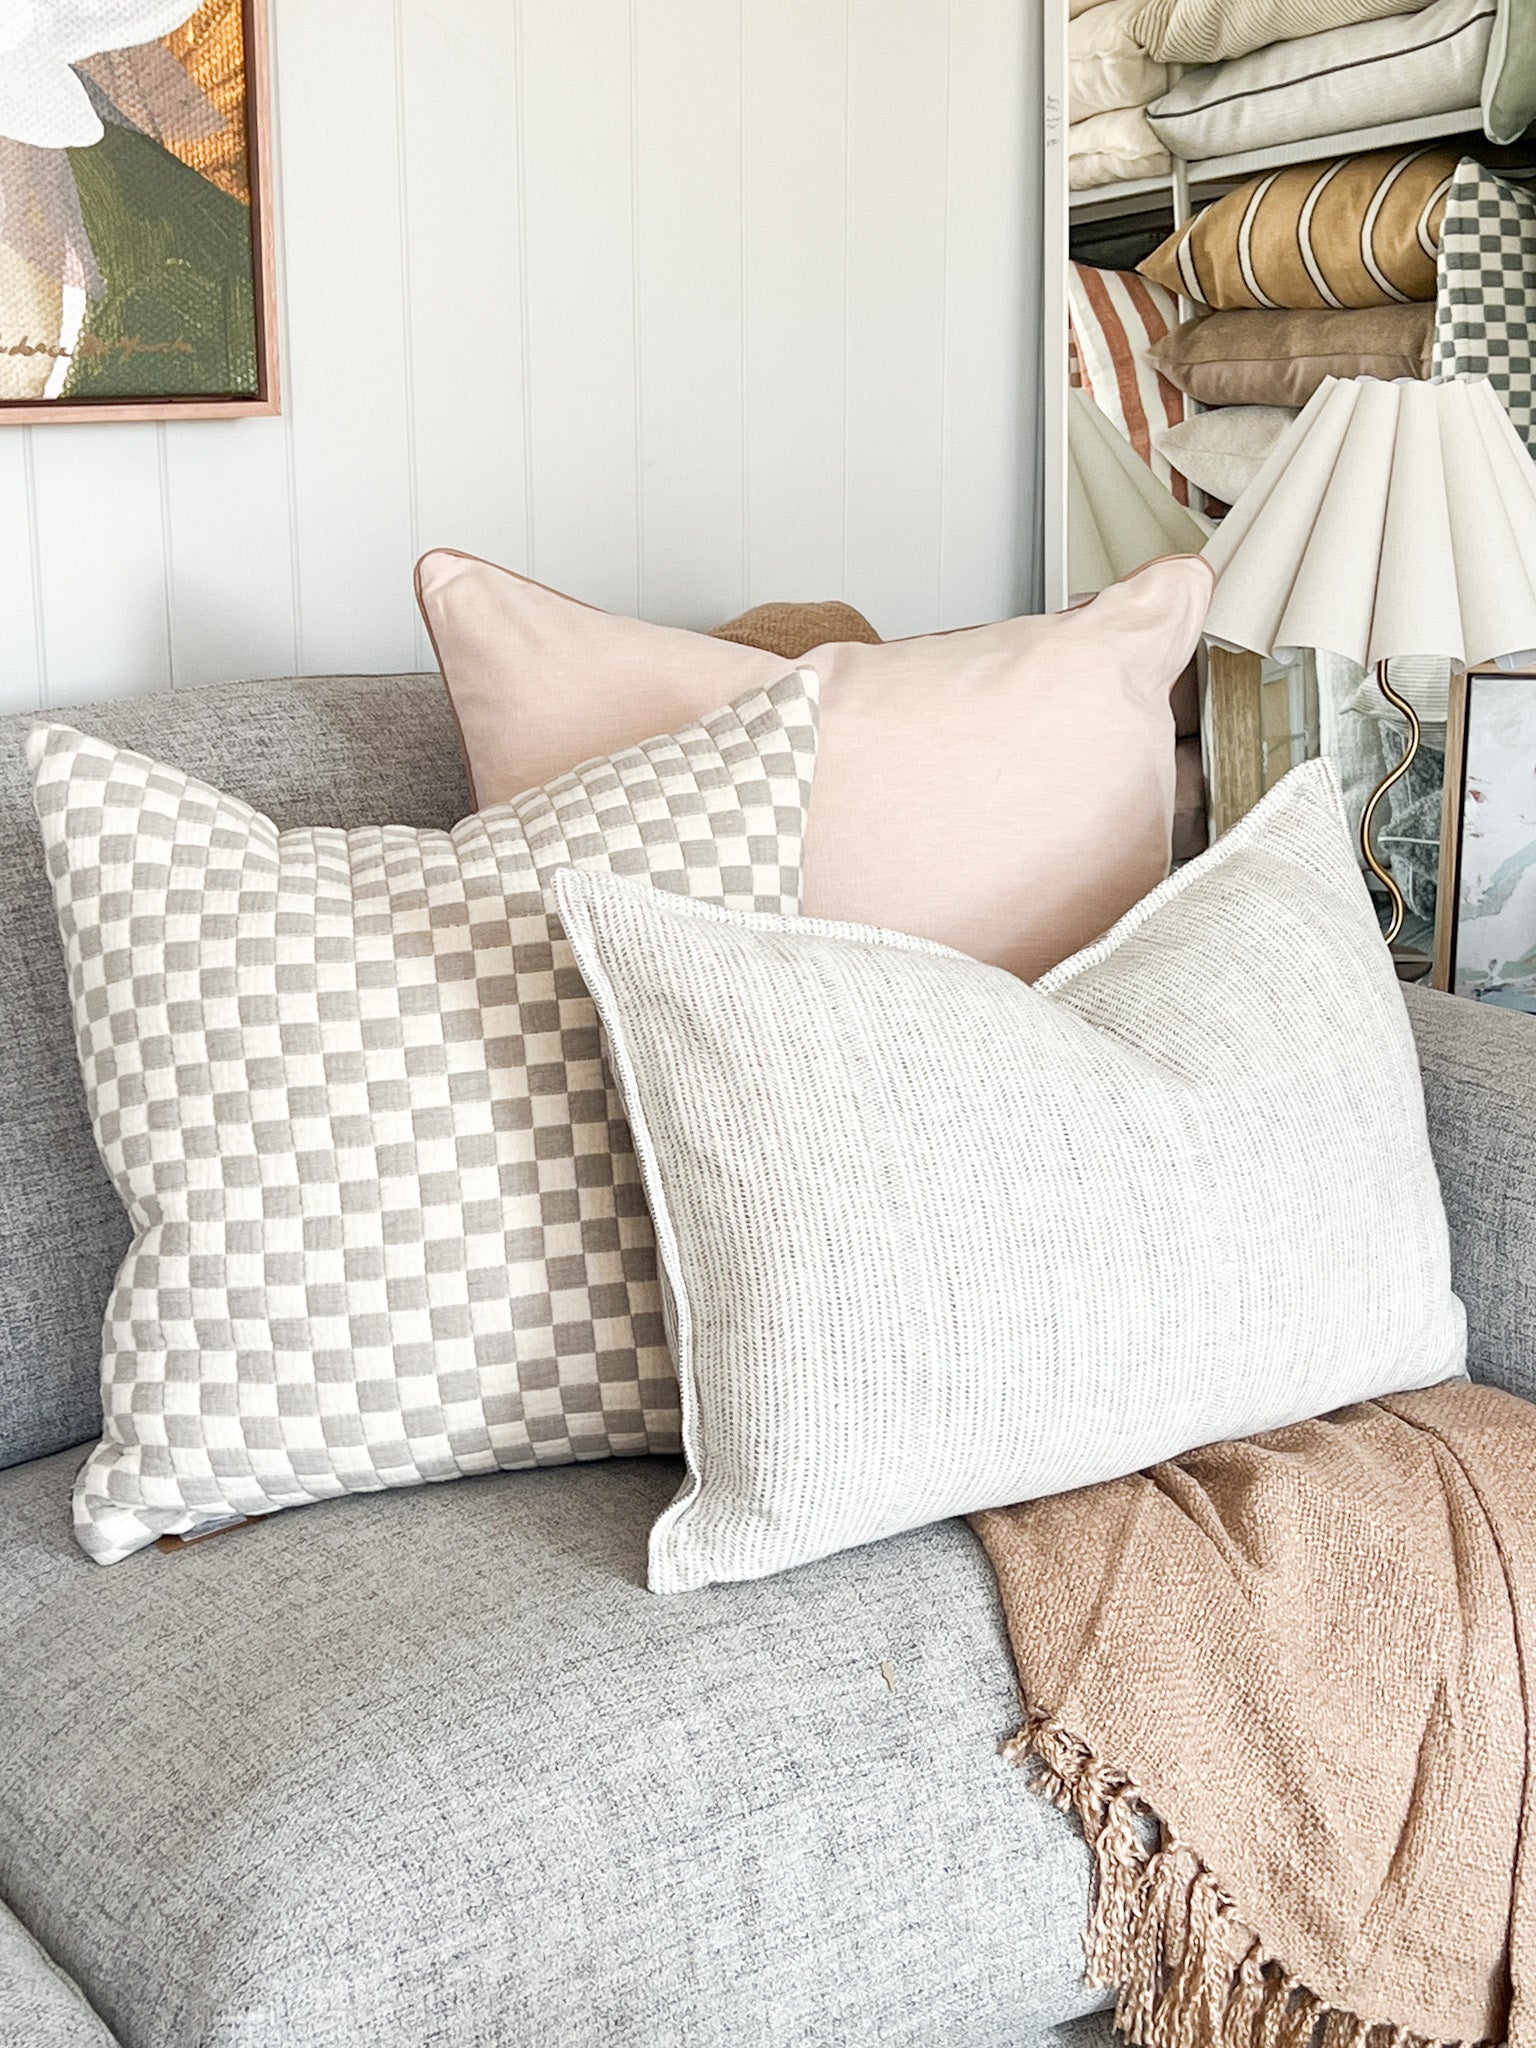 Choosing the perfect cushion combo every time!